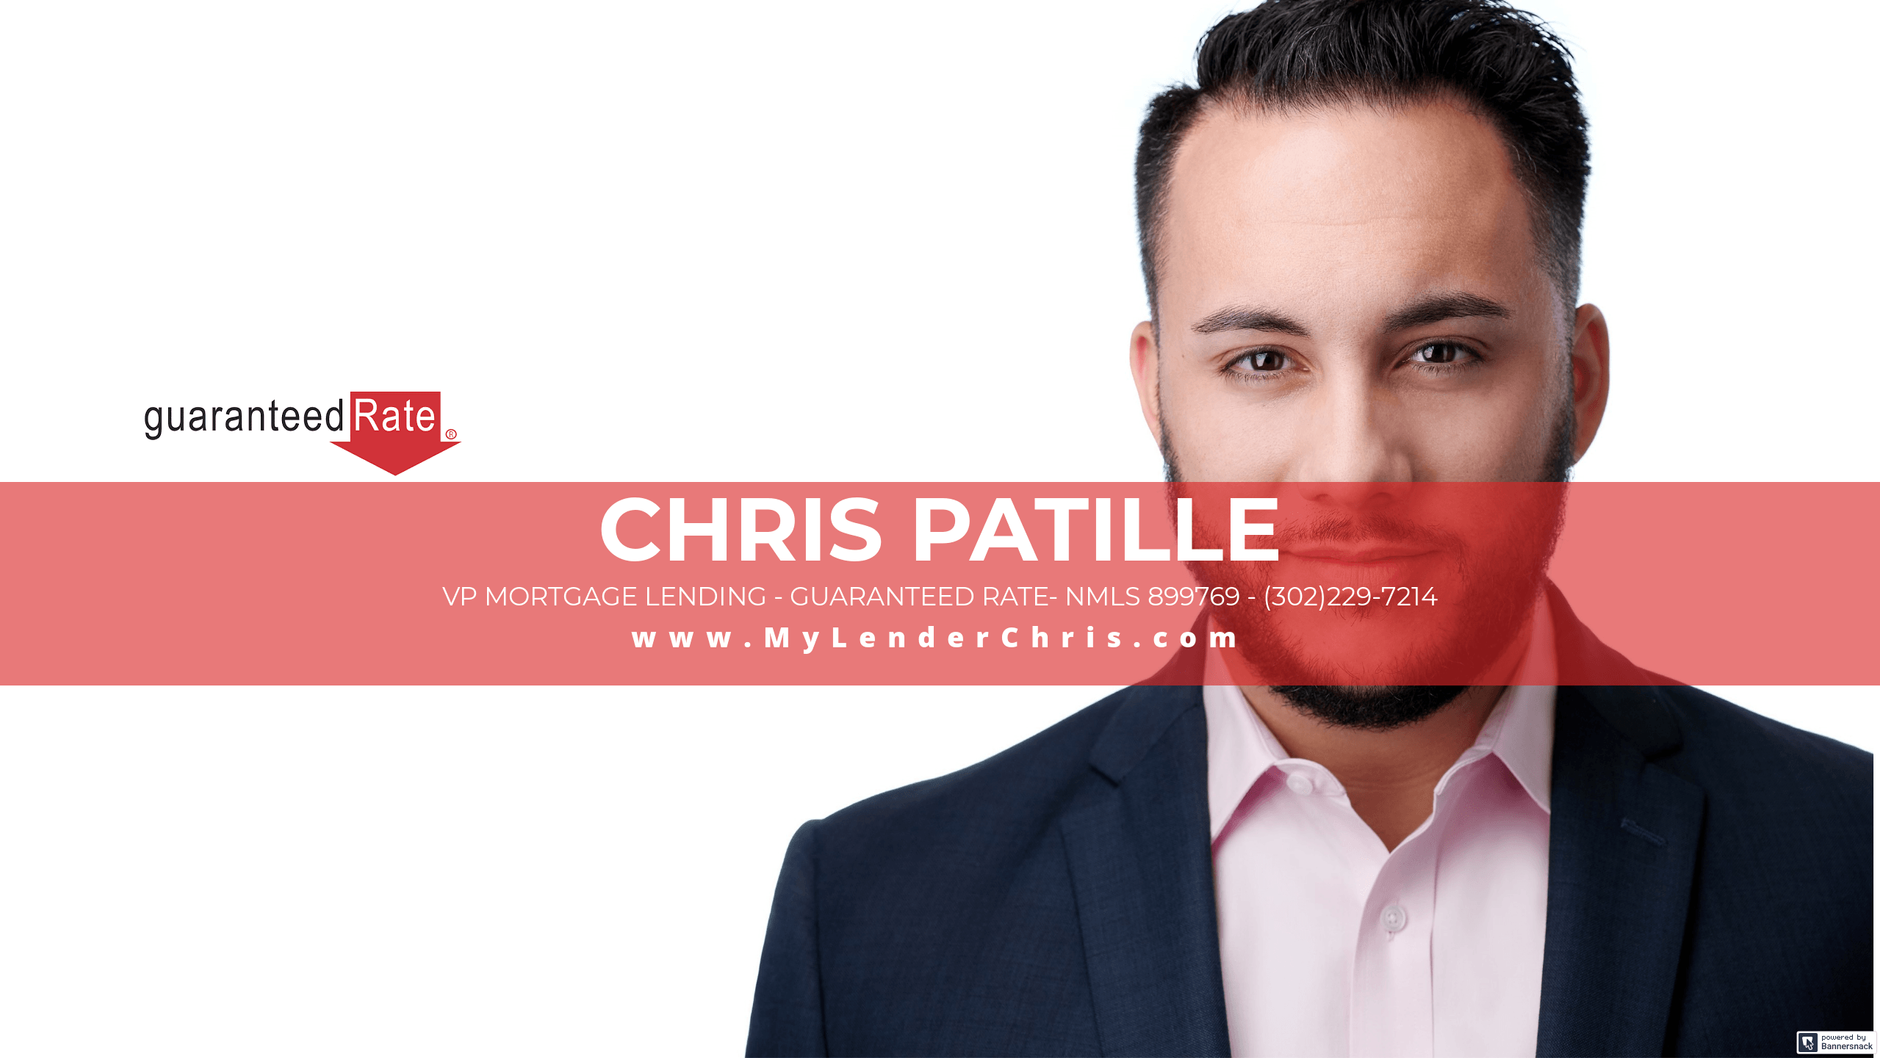 Mortgage Mondays with Christopher Patille